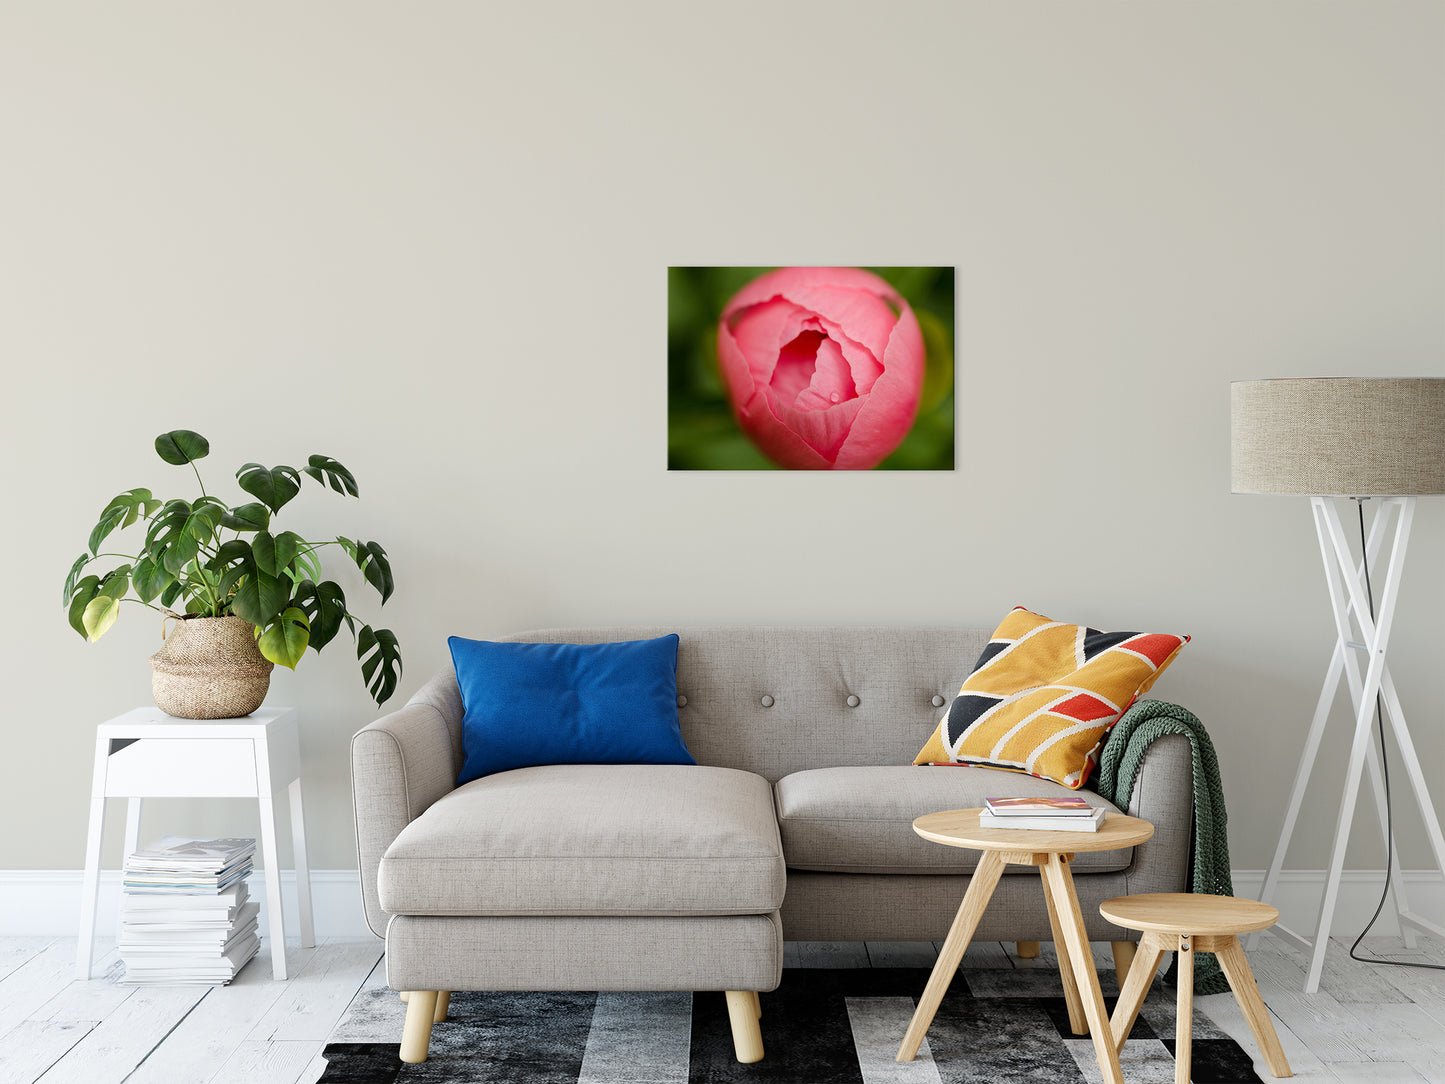 Peony Bud Nature / Floral Photo Fine Art Canvas Wall Art Prints 20" x 30" - PIPAFINEART